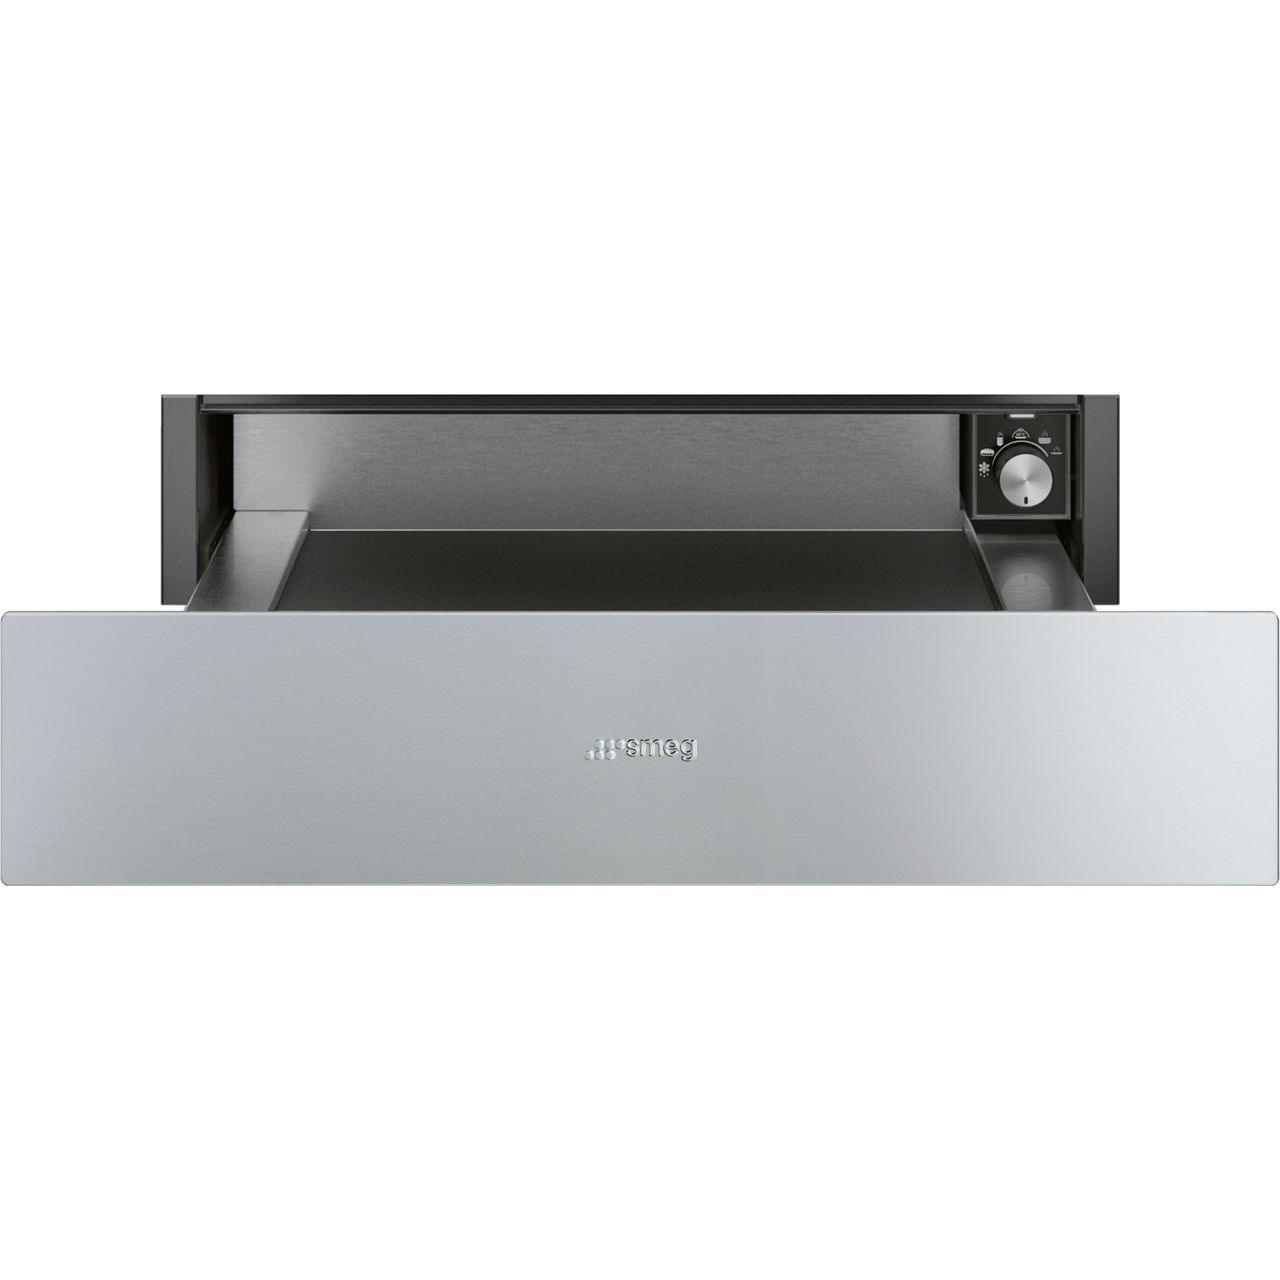 Smeg Classic CPR315X Built In Warming Drawer Review